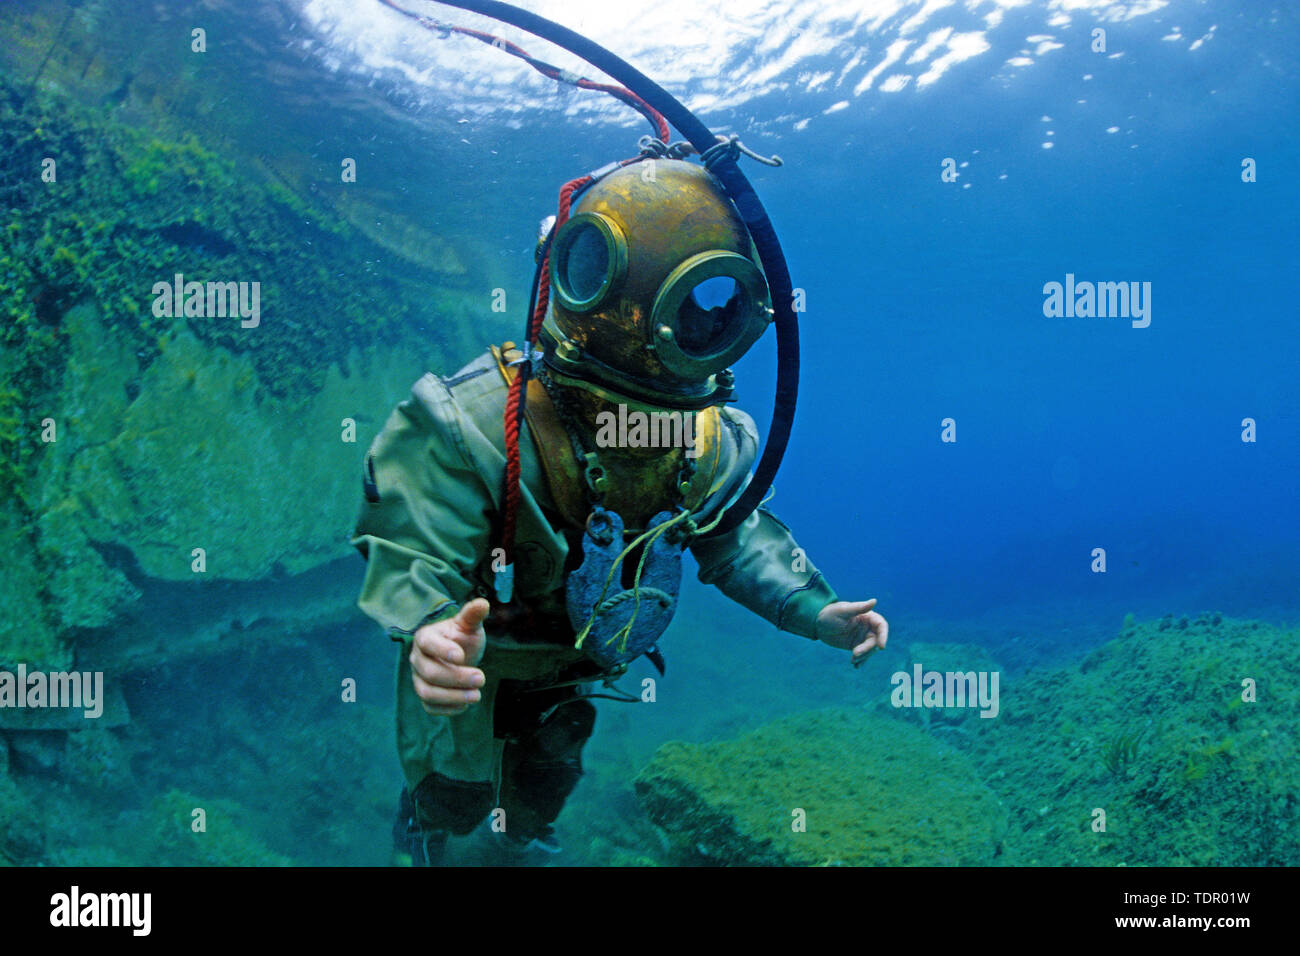 Helmet diver with historic equipment at seabed, Marseille, France Stock Photo